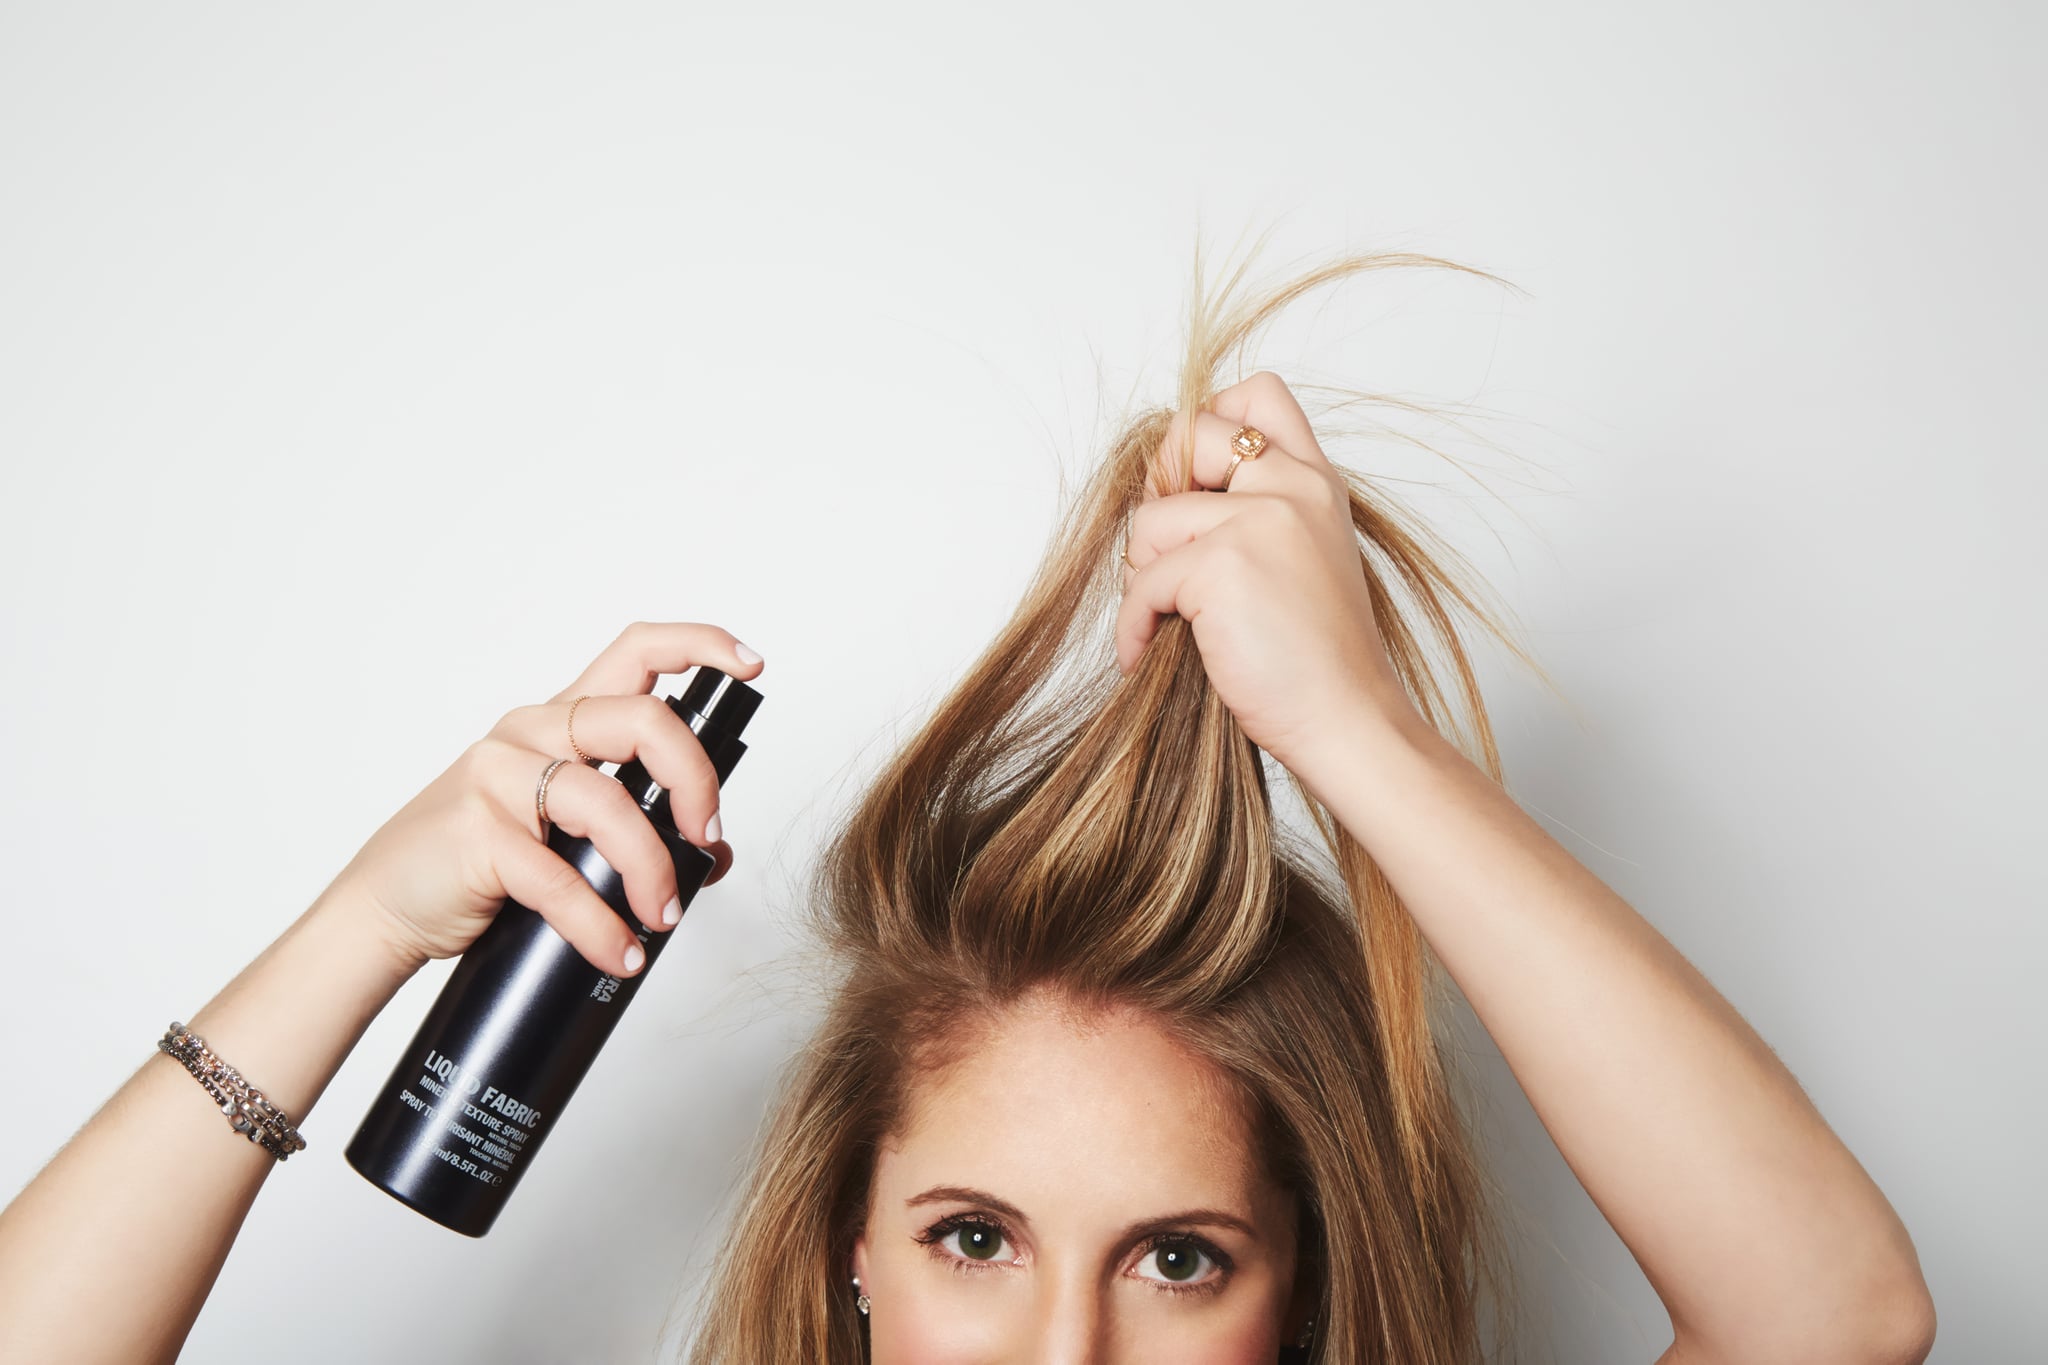 Using Dry Shampoo to “Clean” Hair | Are You Making These 6 Terrible Hair-Washing Mistakes? | POPSUGAR Beauty Photo 2